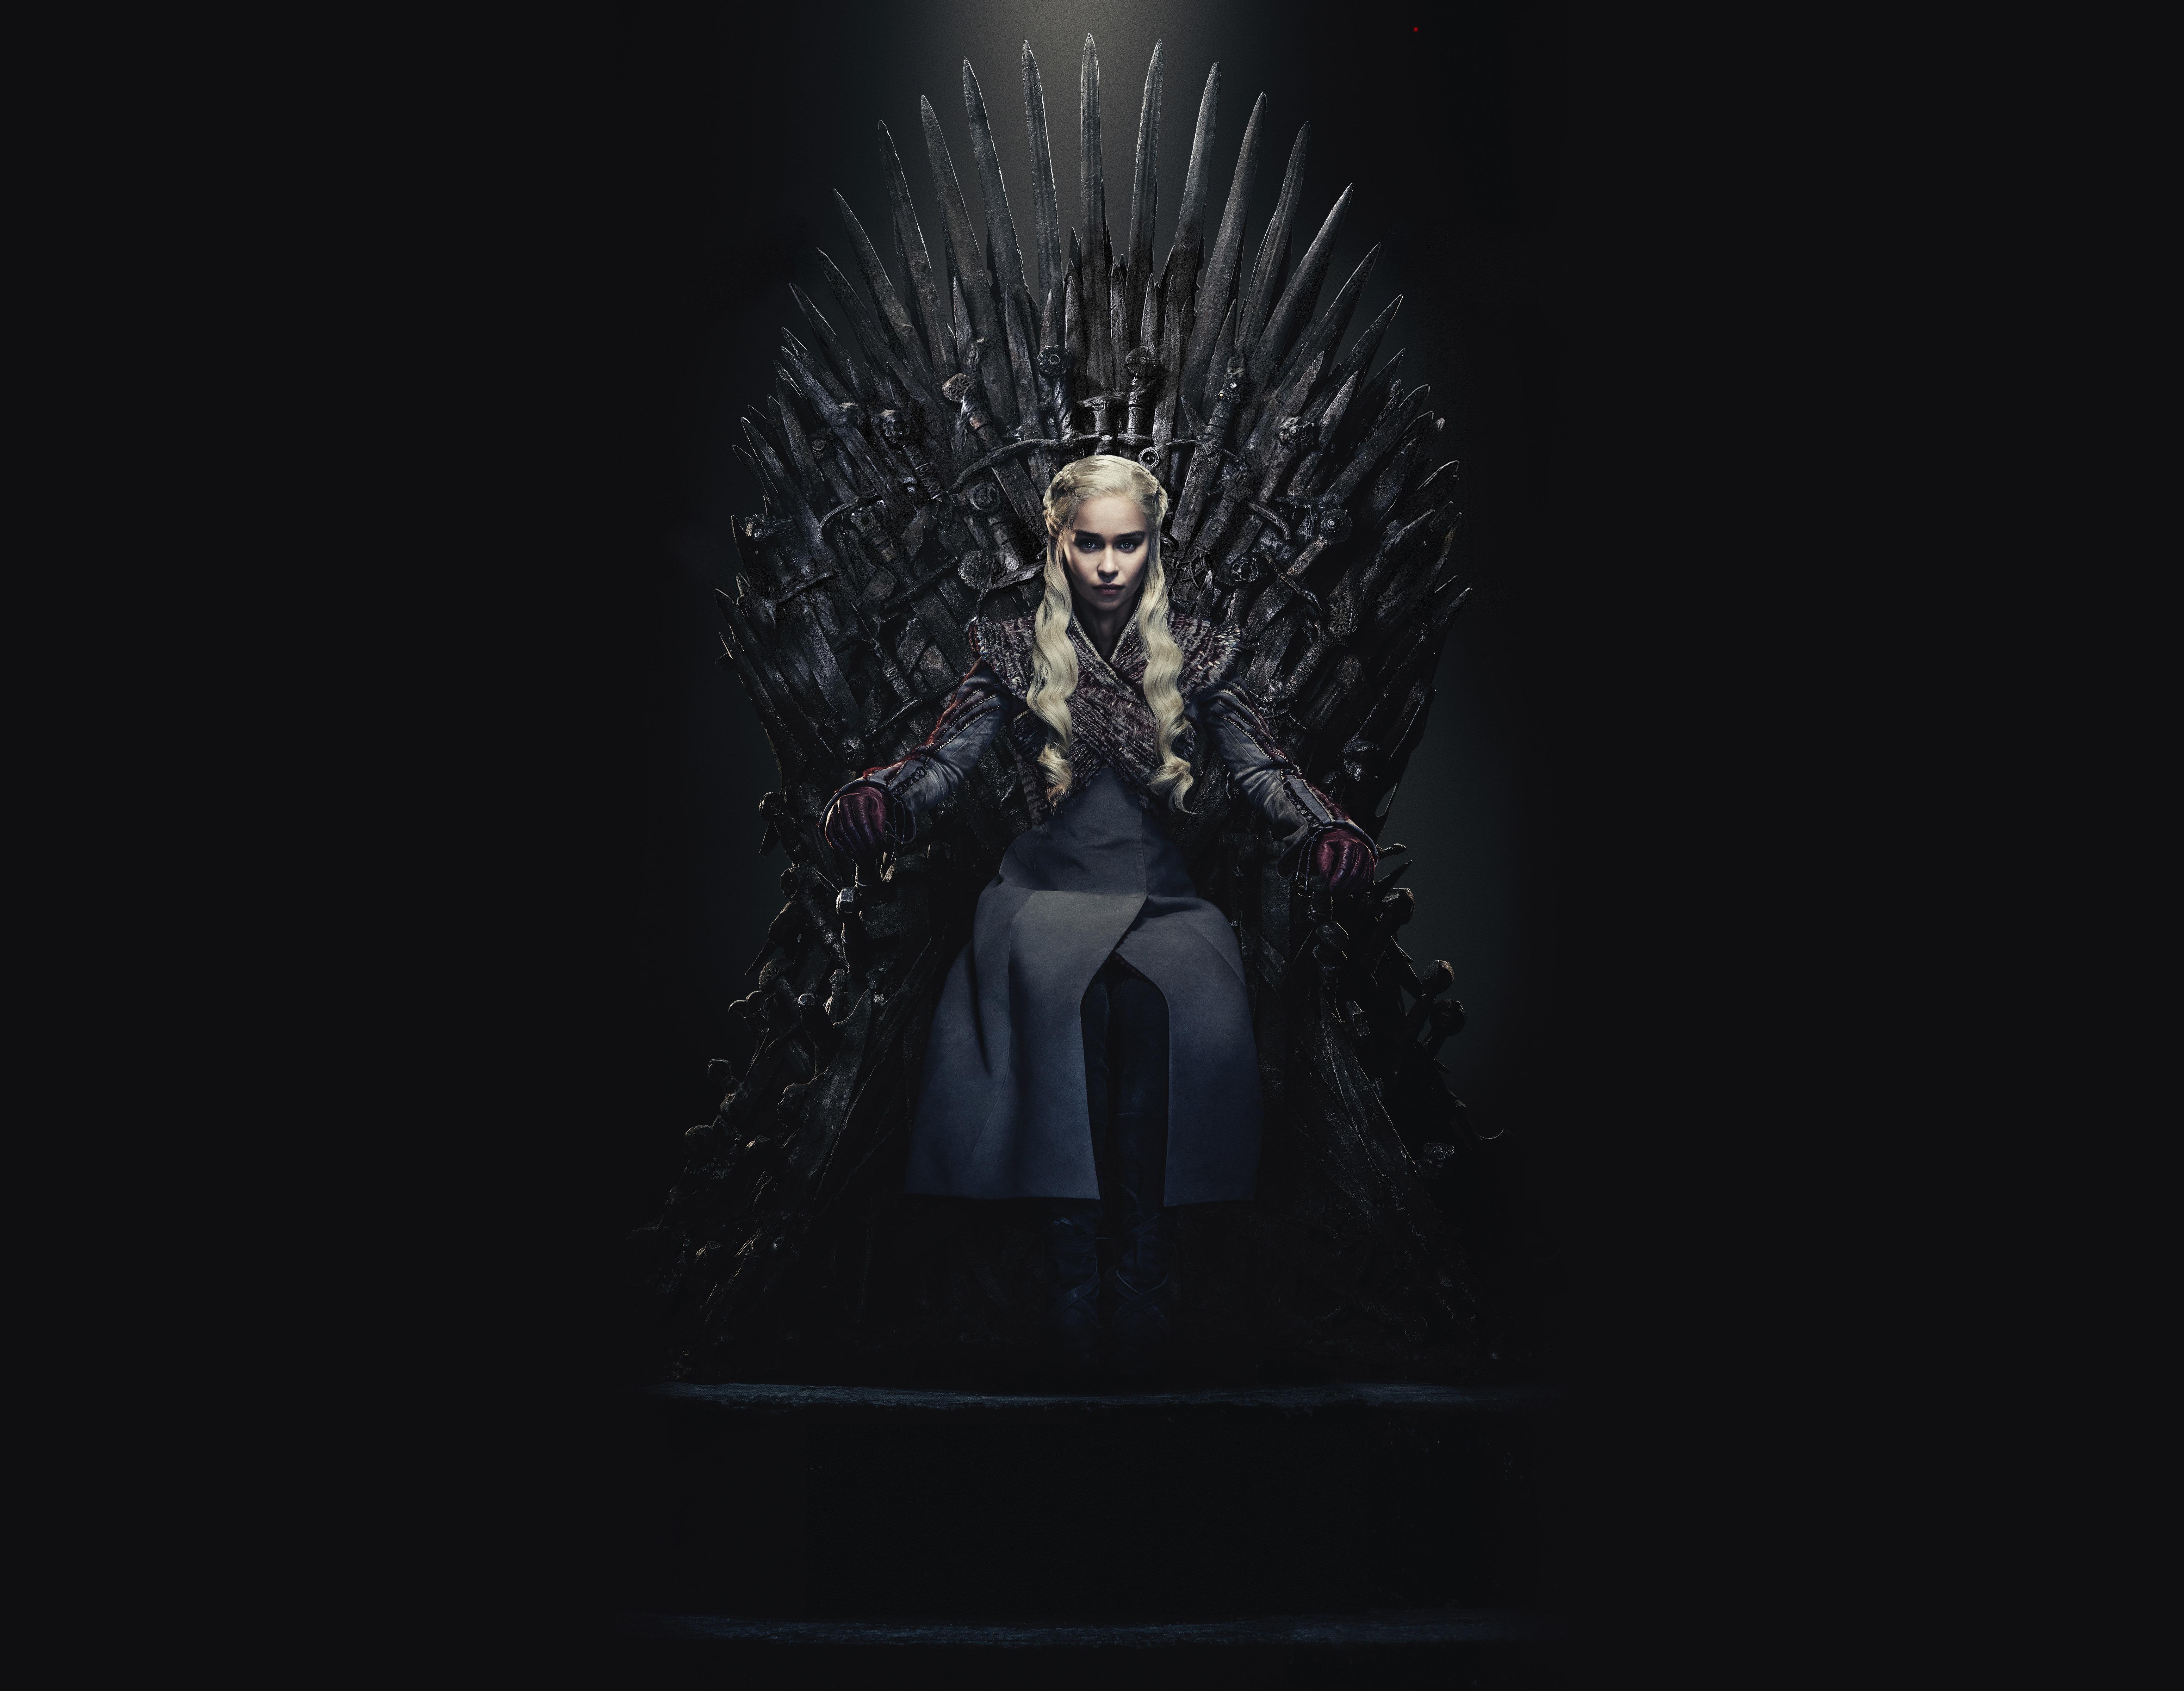 Daenerys Targaryen Queen Of the Ashes in The Iron Throne